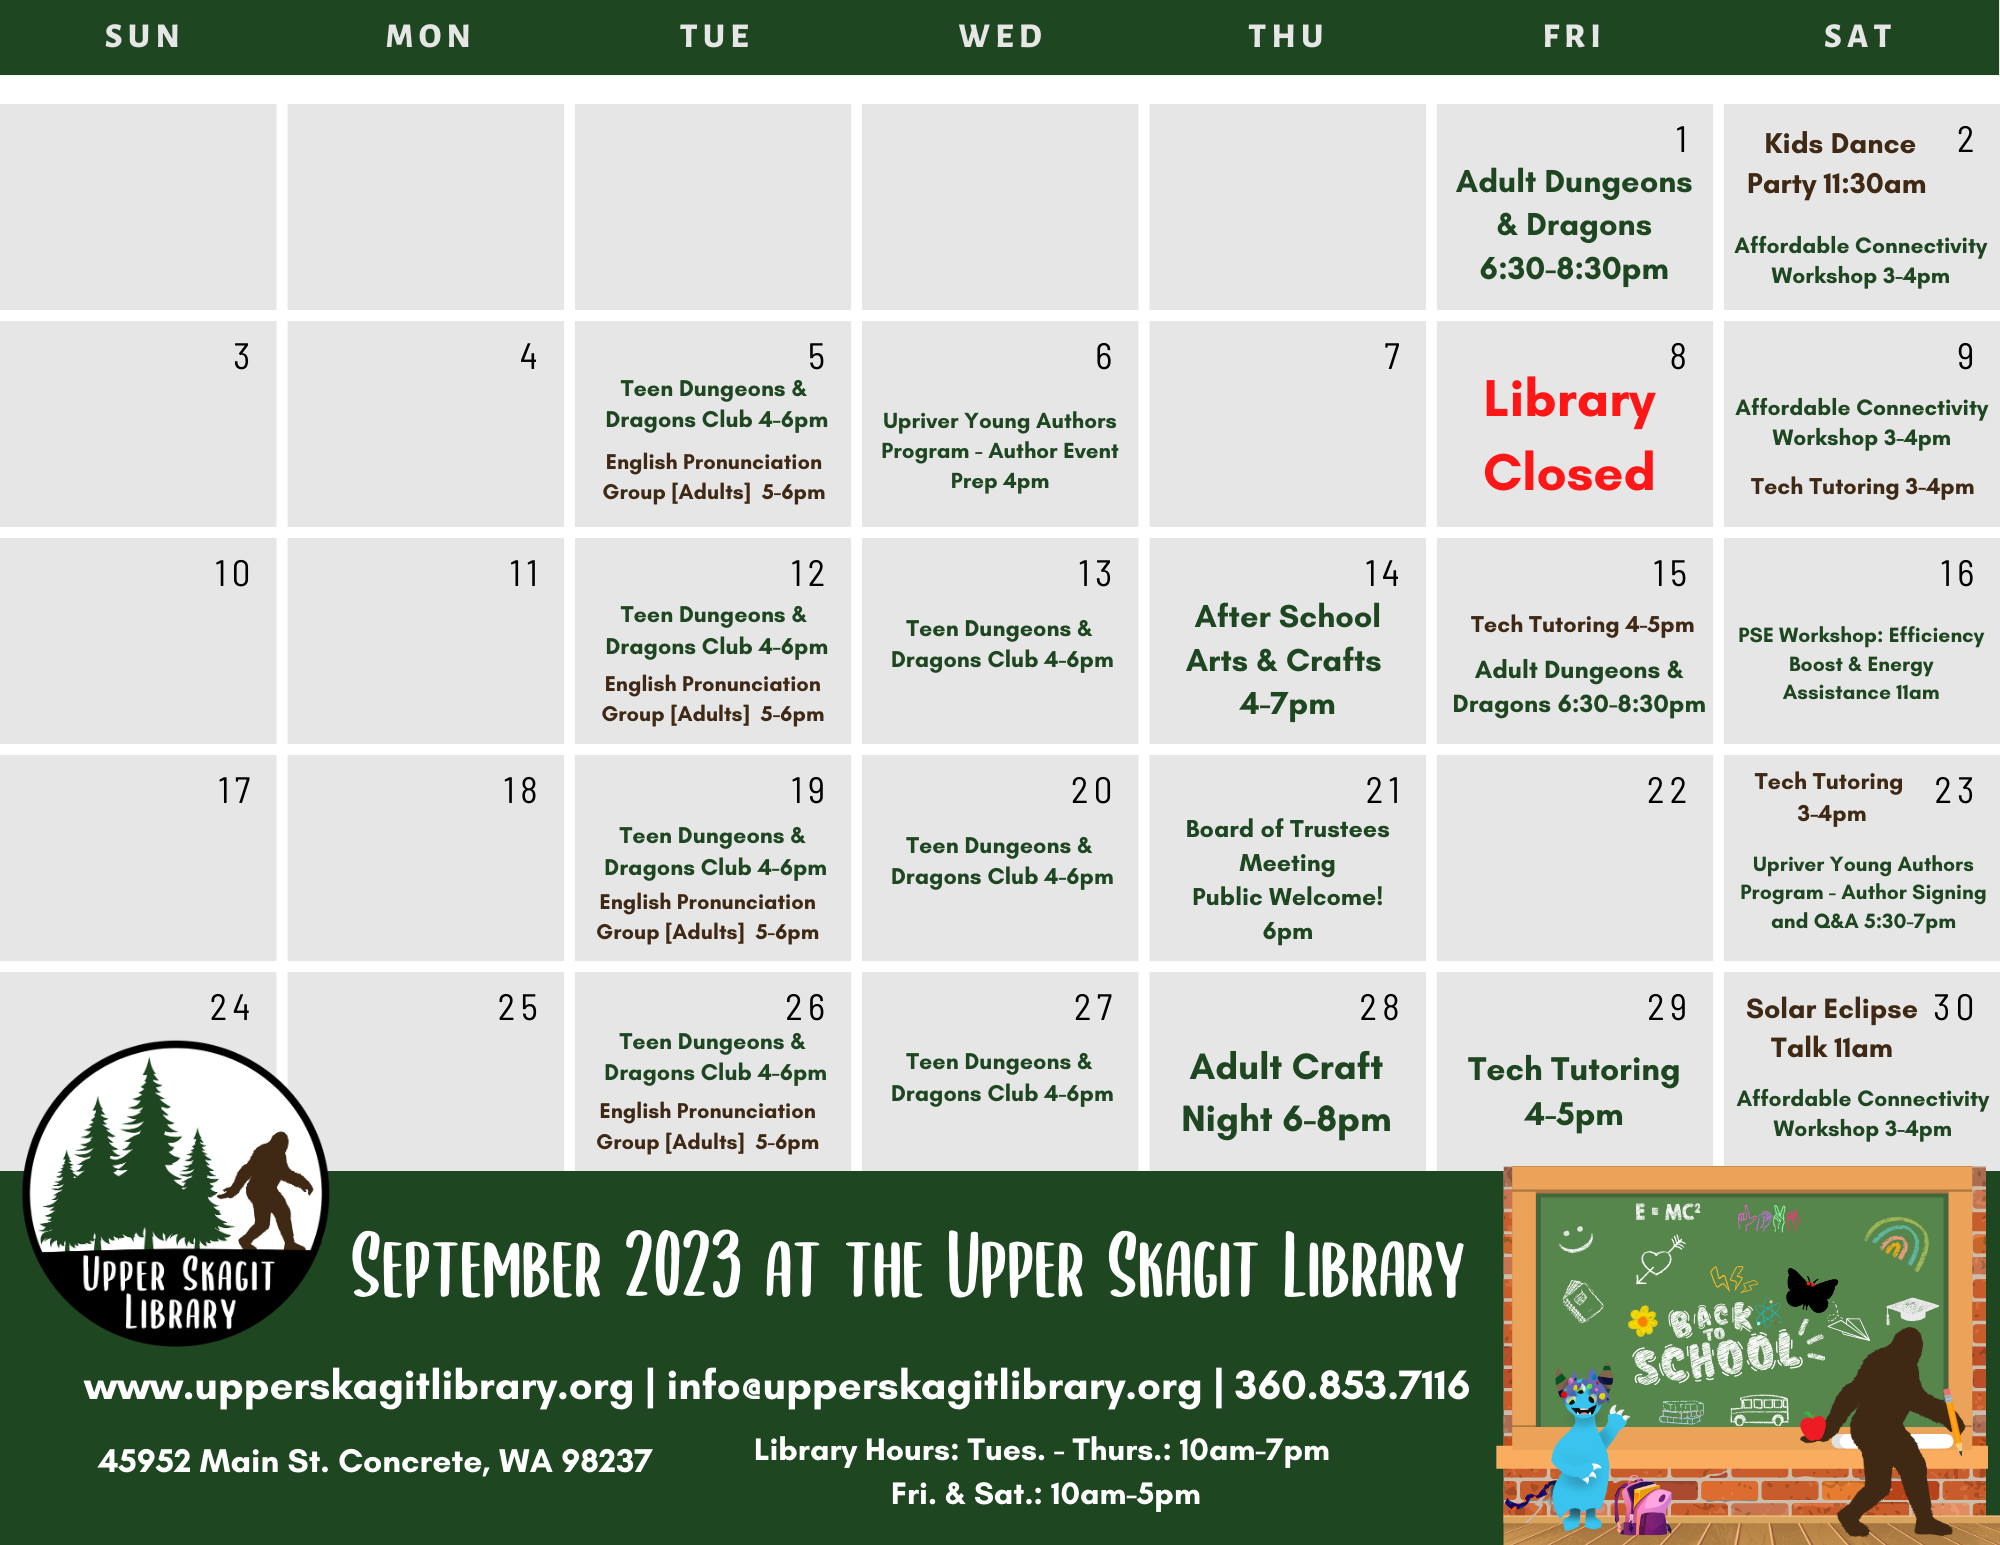 This calendar is showing the different activities and programs that will be happening in the month of September.